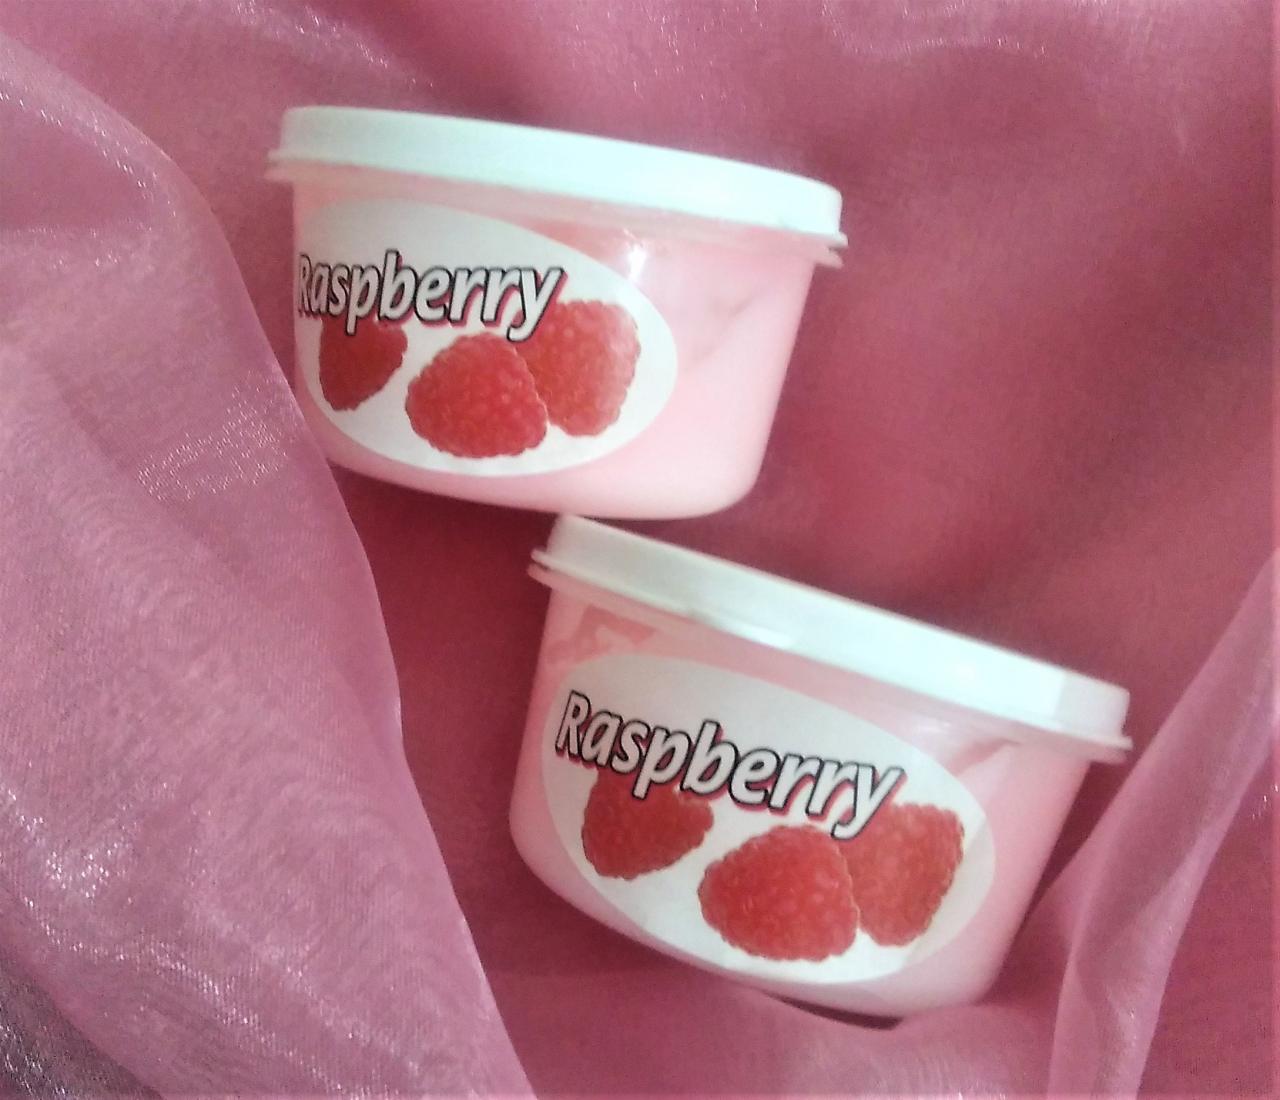 Raspberry Lotion, Health And Beauty, Bath And Body, Self Care, Moistuizers, Body Lotion, Lotion, Raspberry, Trial Size Lotion